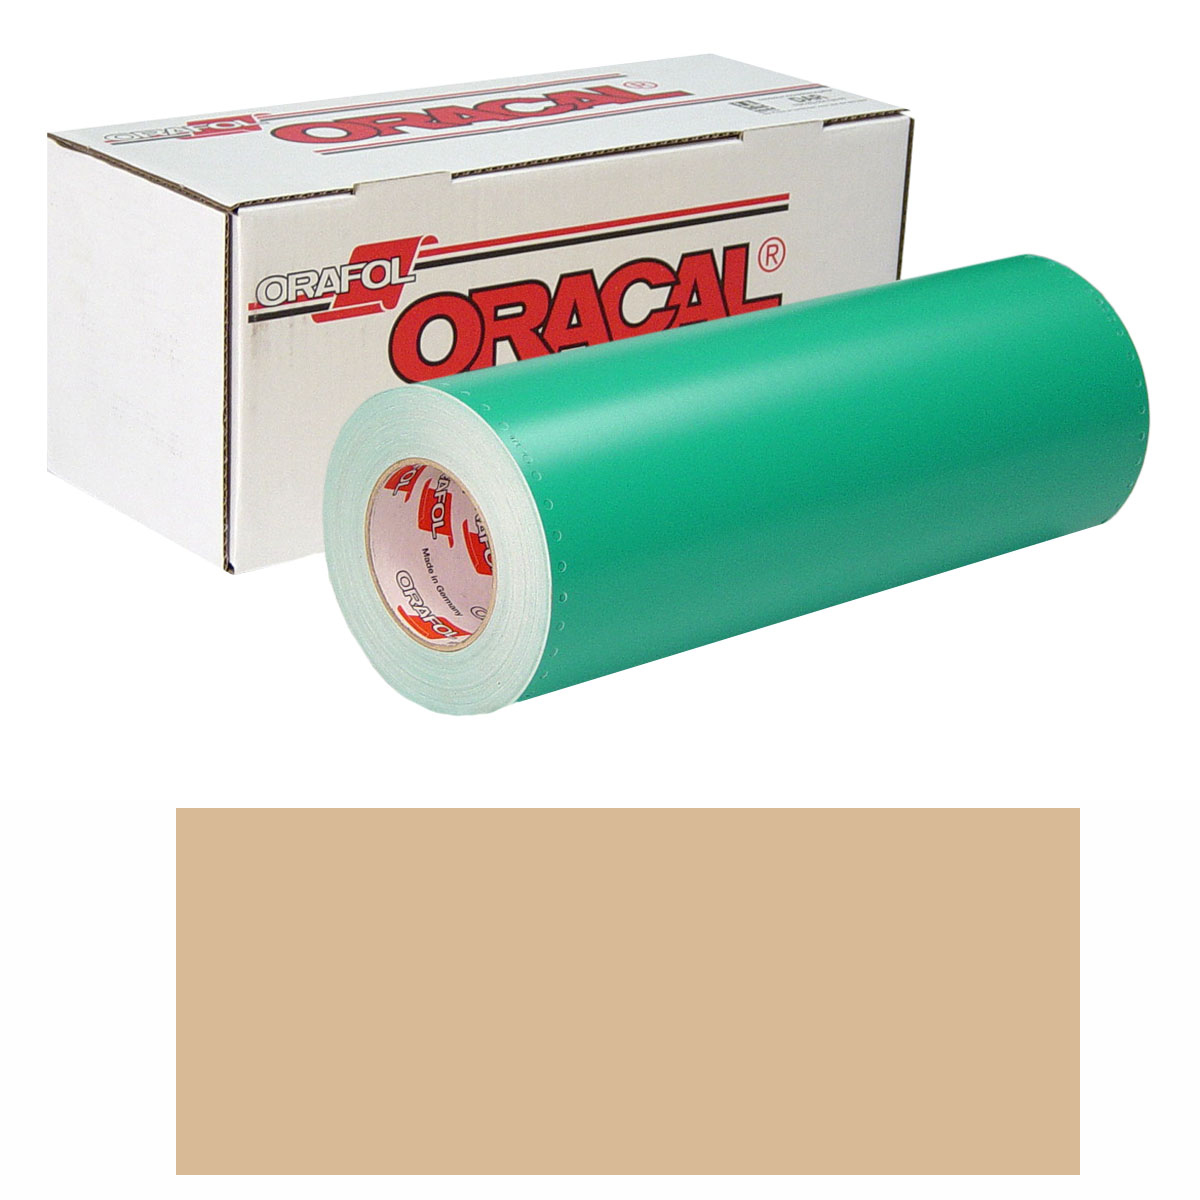 ORACAL 8500 30in X 10yd 081 Light Brown